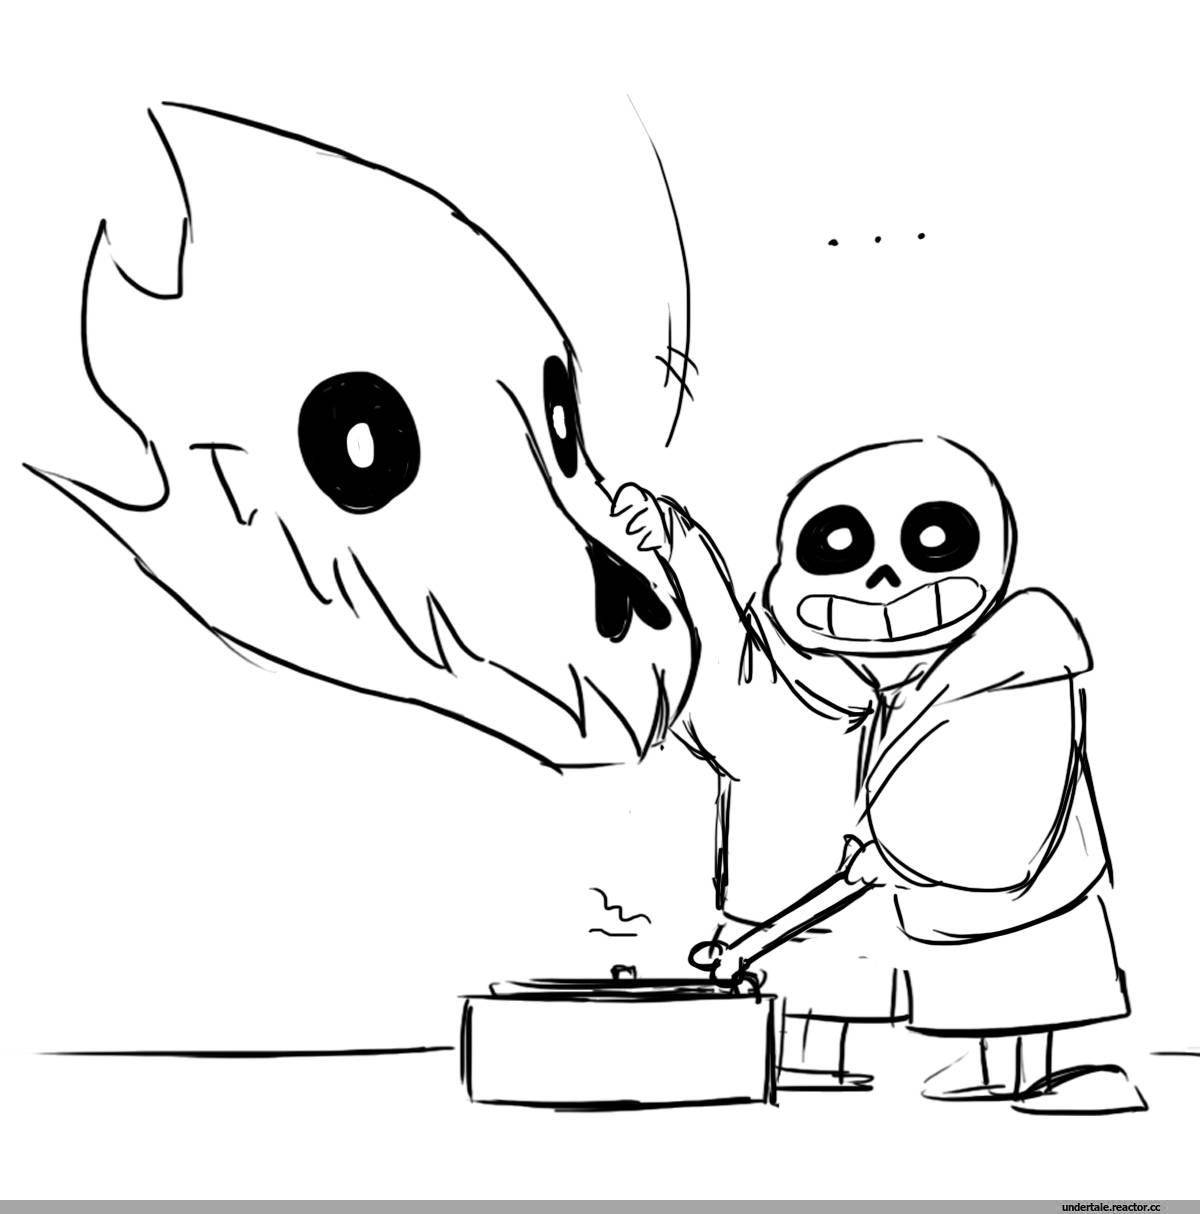 Coloring bright papyrus and sans